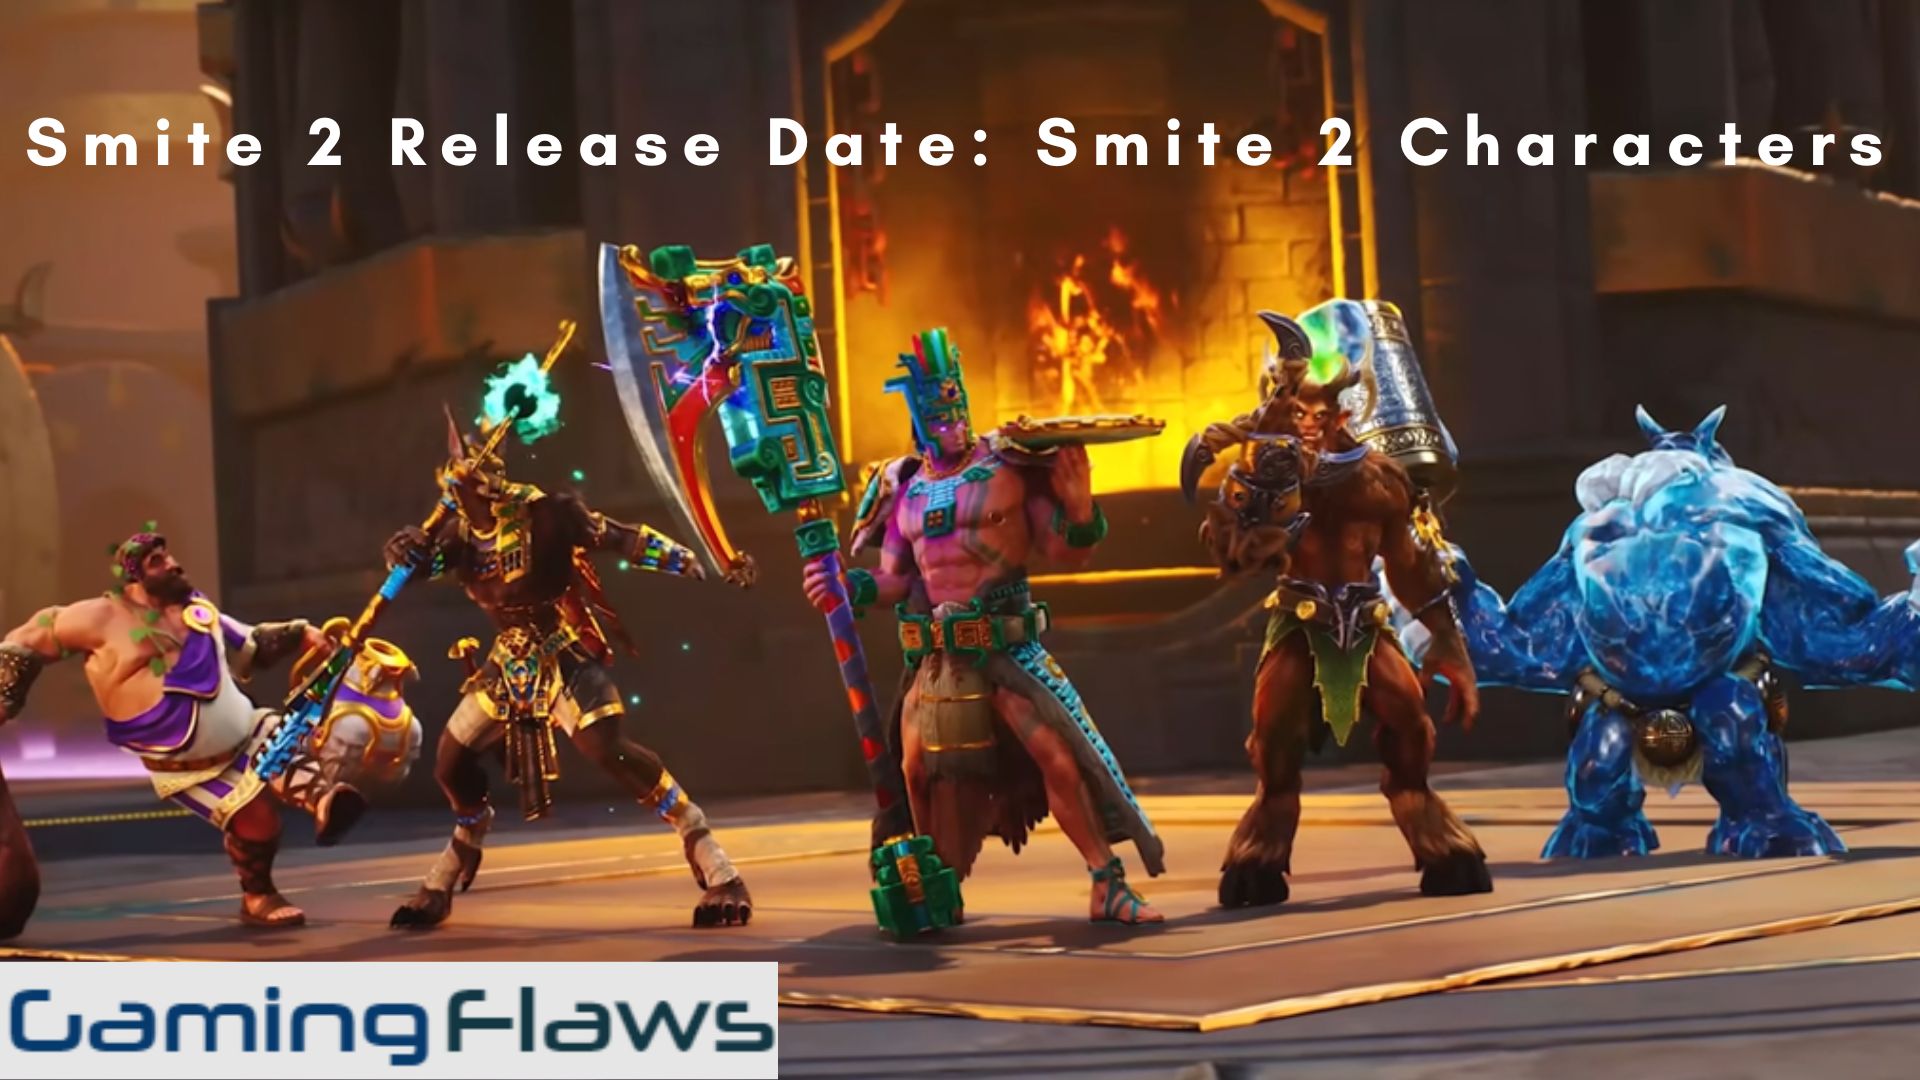 Smite 2 Release Date: Smite 2 Characters